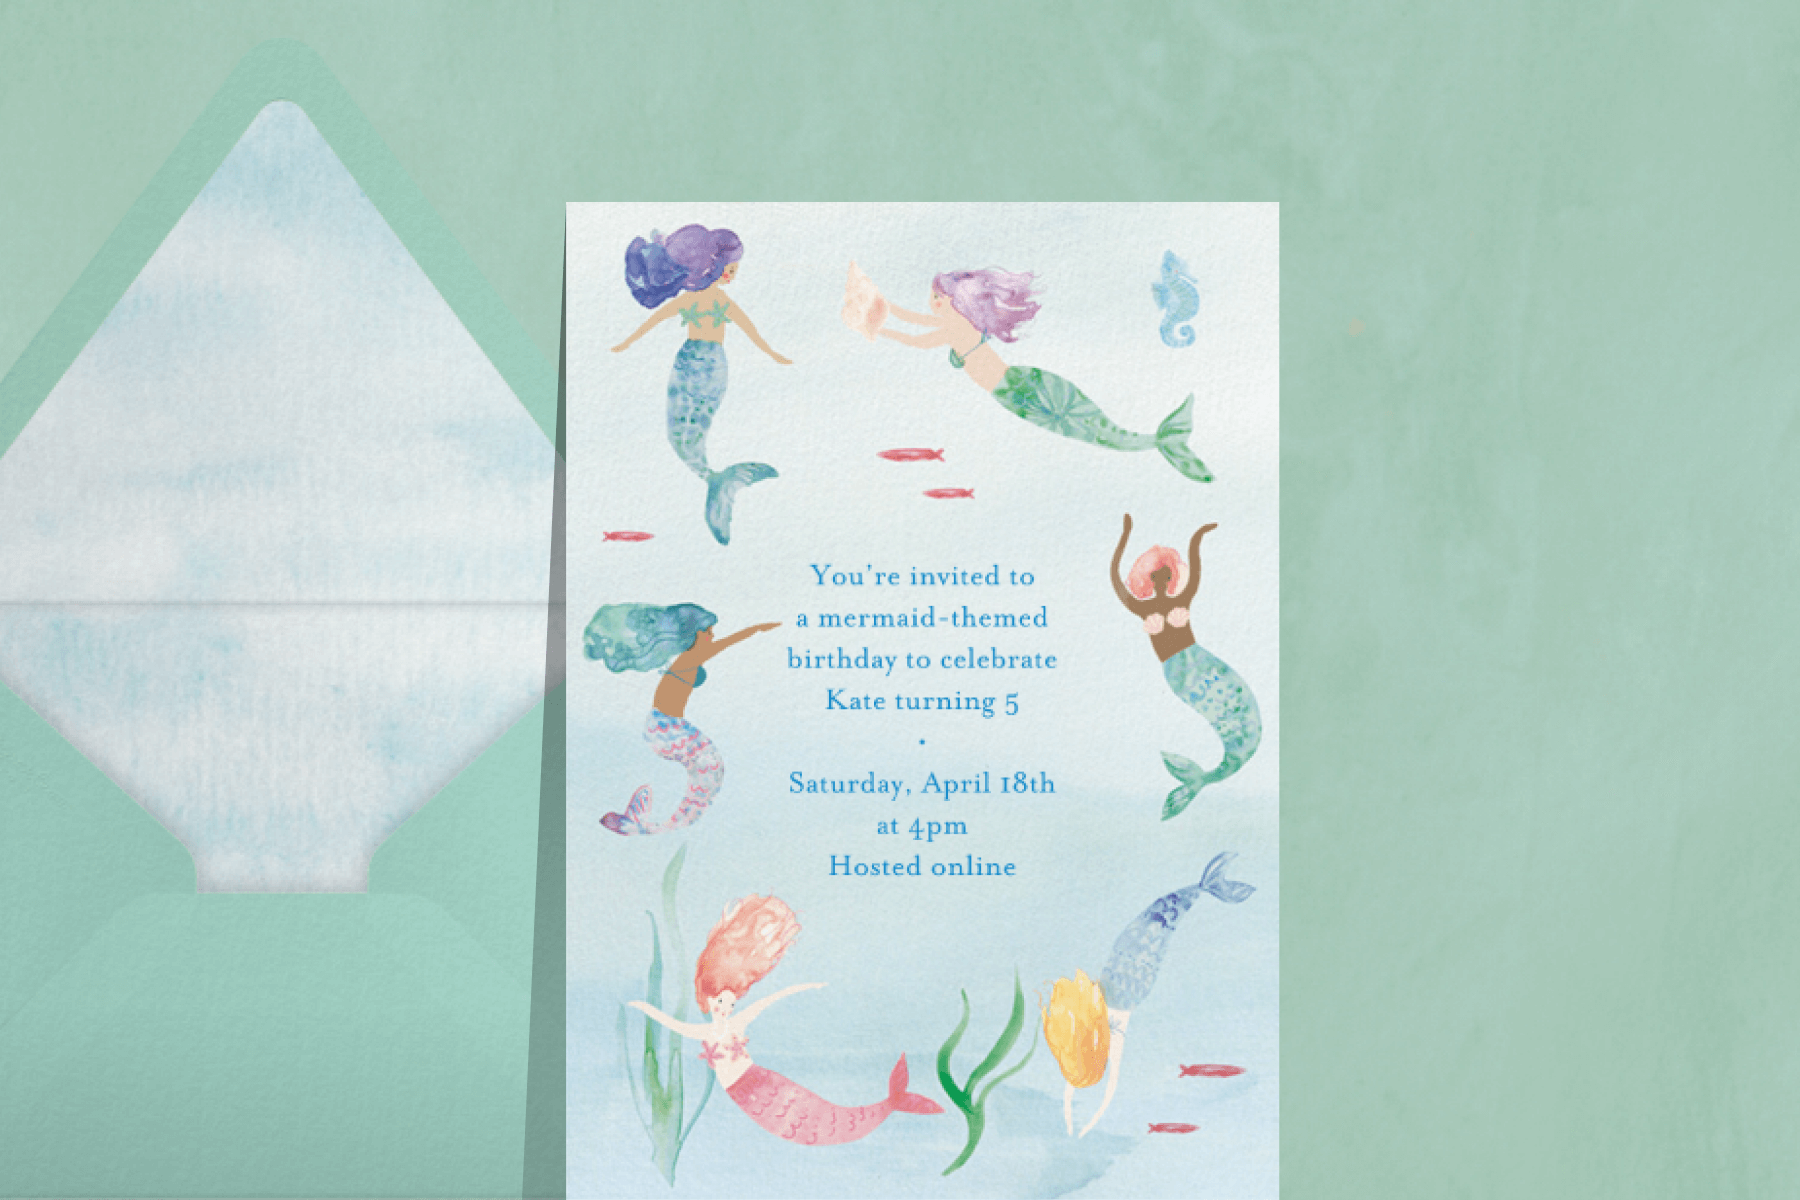 A kids’ birthday party invitation featuring mermaids of all colors.